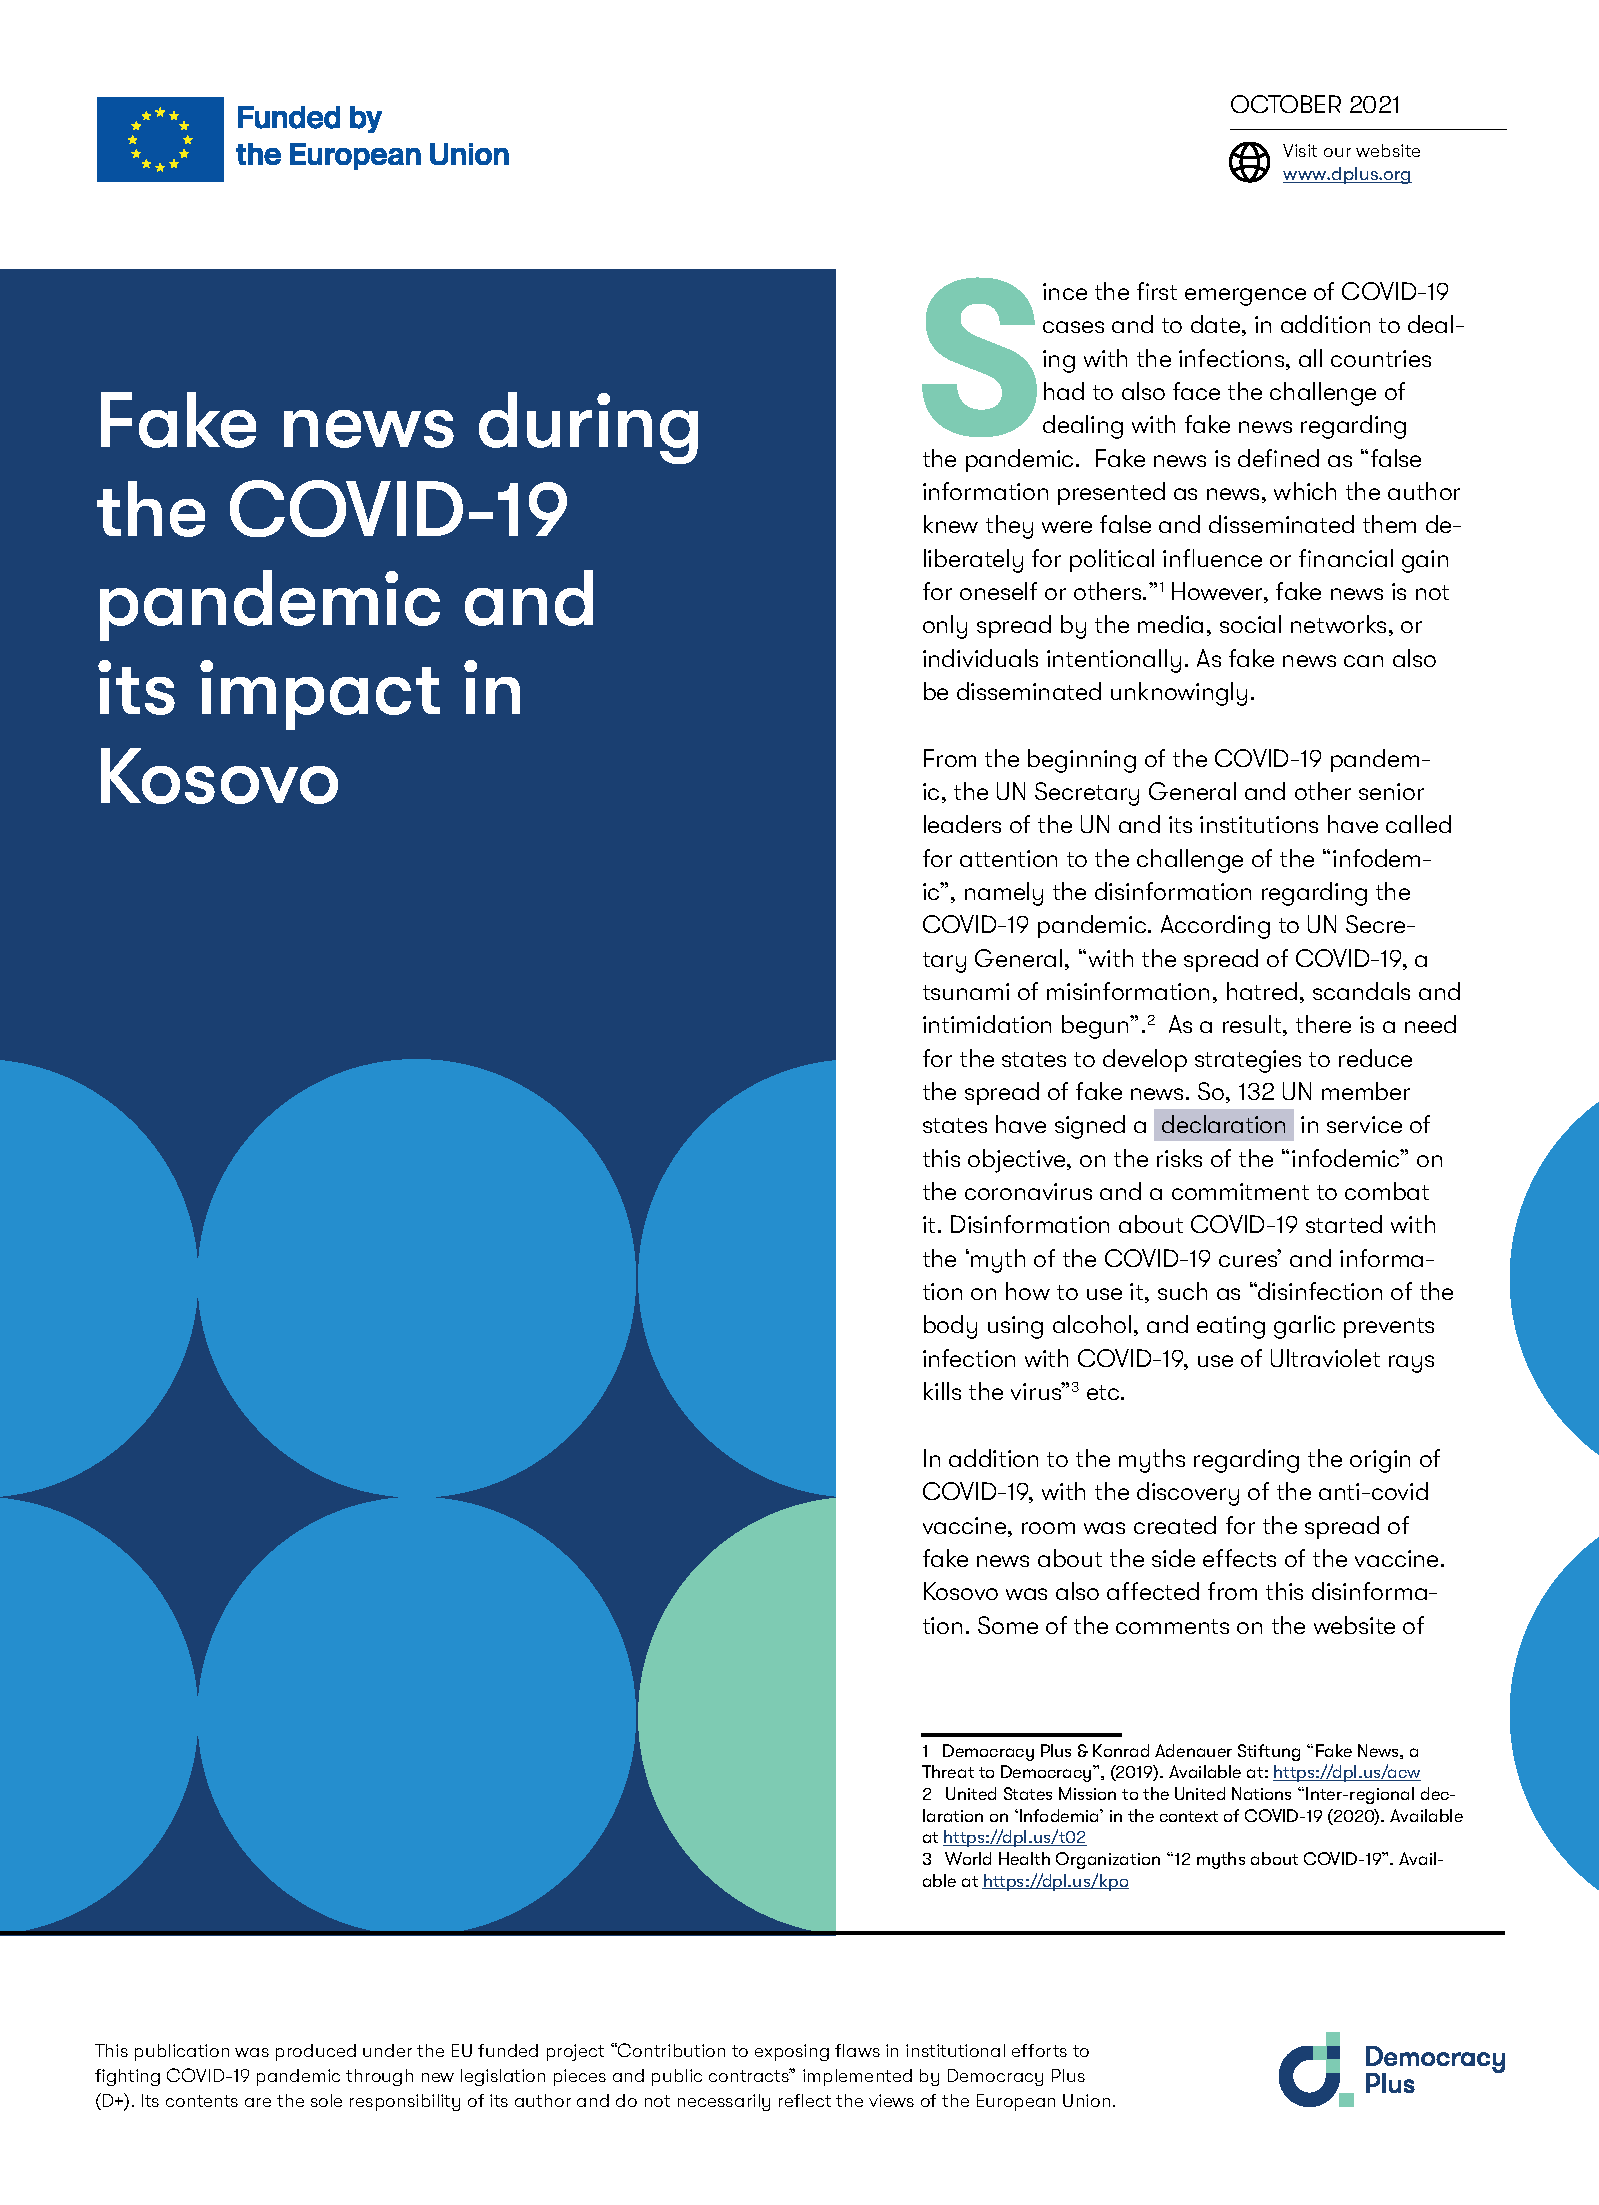 Fake news during the COVID-19 pandemic and its impact in Kosovo